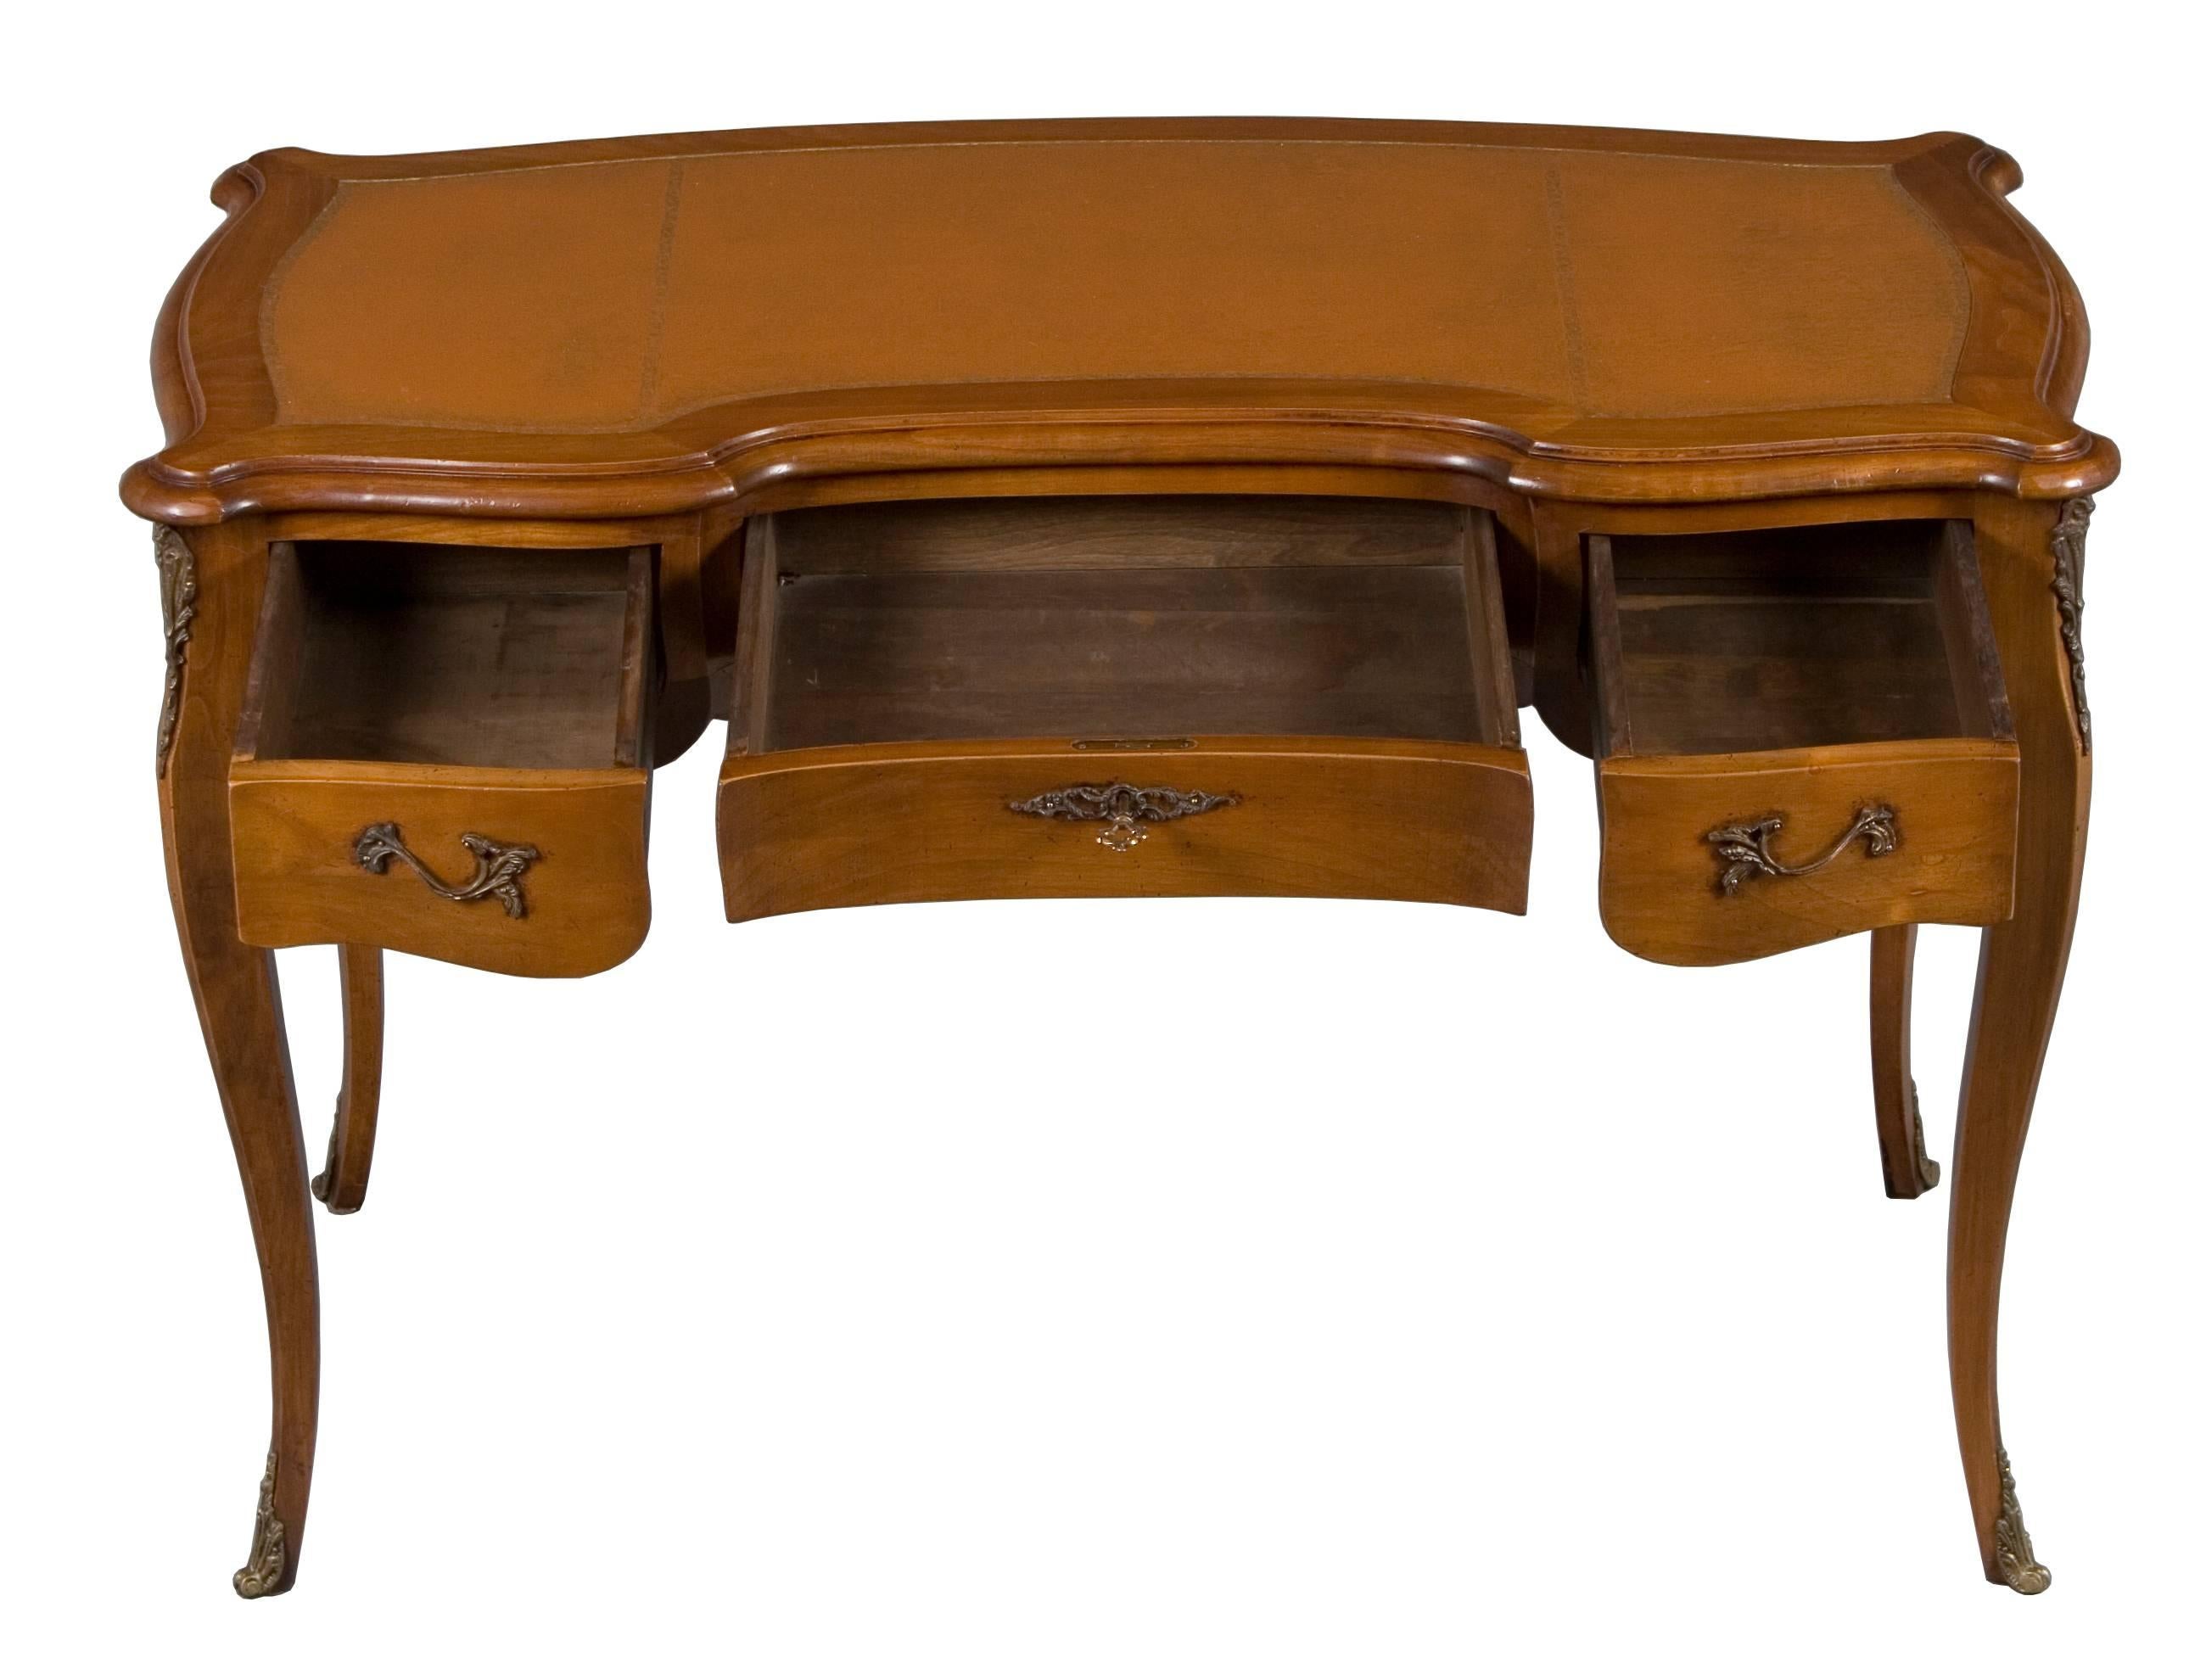 This antique desk hails from France where it was created around the year 1900. Done in a Louis XV style, it makes a wonderful piece to sit at.
This piece consists of carved cherry wood. It retains a stunning patina and medium color. Ormolu mounted